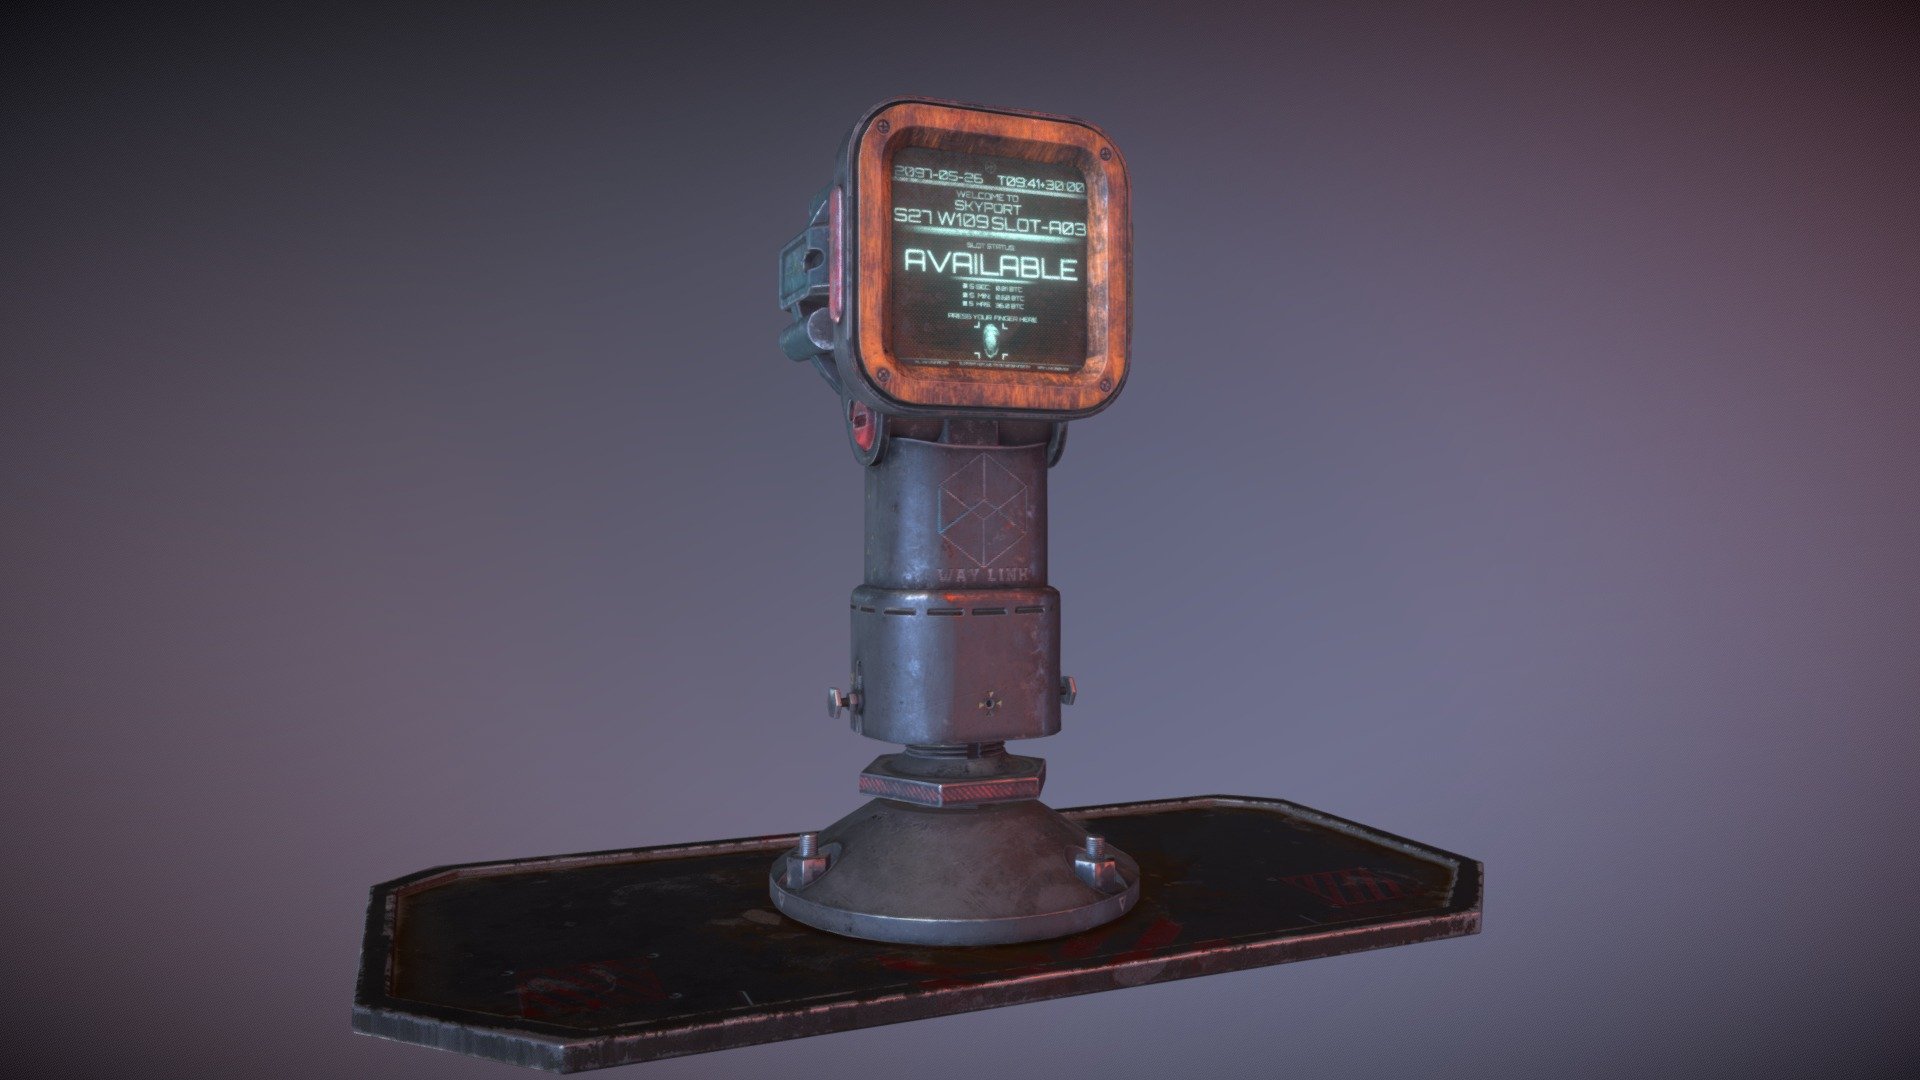 A futuristic parking meter designed to use above the sky. 
In this project, my main focus is hard surface modeling and the creation of a screen texture in Substance Designer.

Background story: 
In the year of 2097, personal aircrafts are heavily use among our civilization, cryptocurrency become our main unit for trade, and most of us are living above the sky. 
To relieve the ongoing demand for personal aircraft parking slot, &lsquo;WAY LINK' has developed a mid-air GPS tracked parking station for travelers to use 3d model